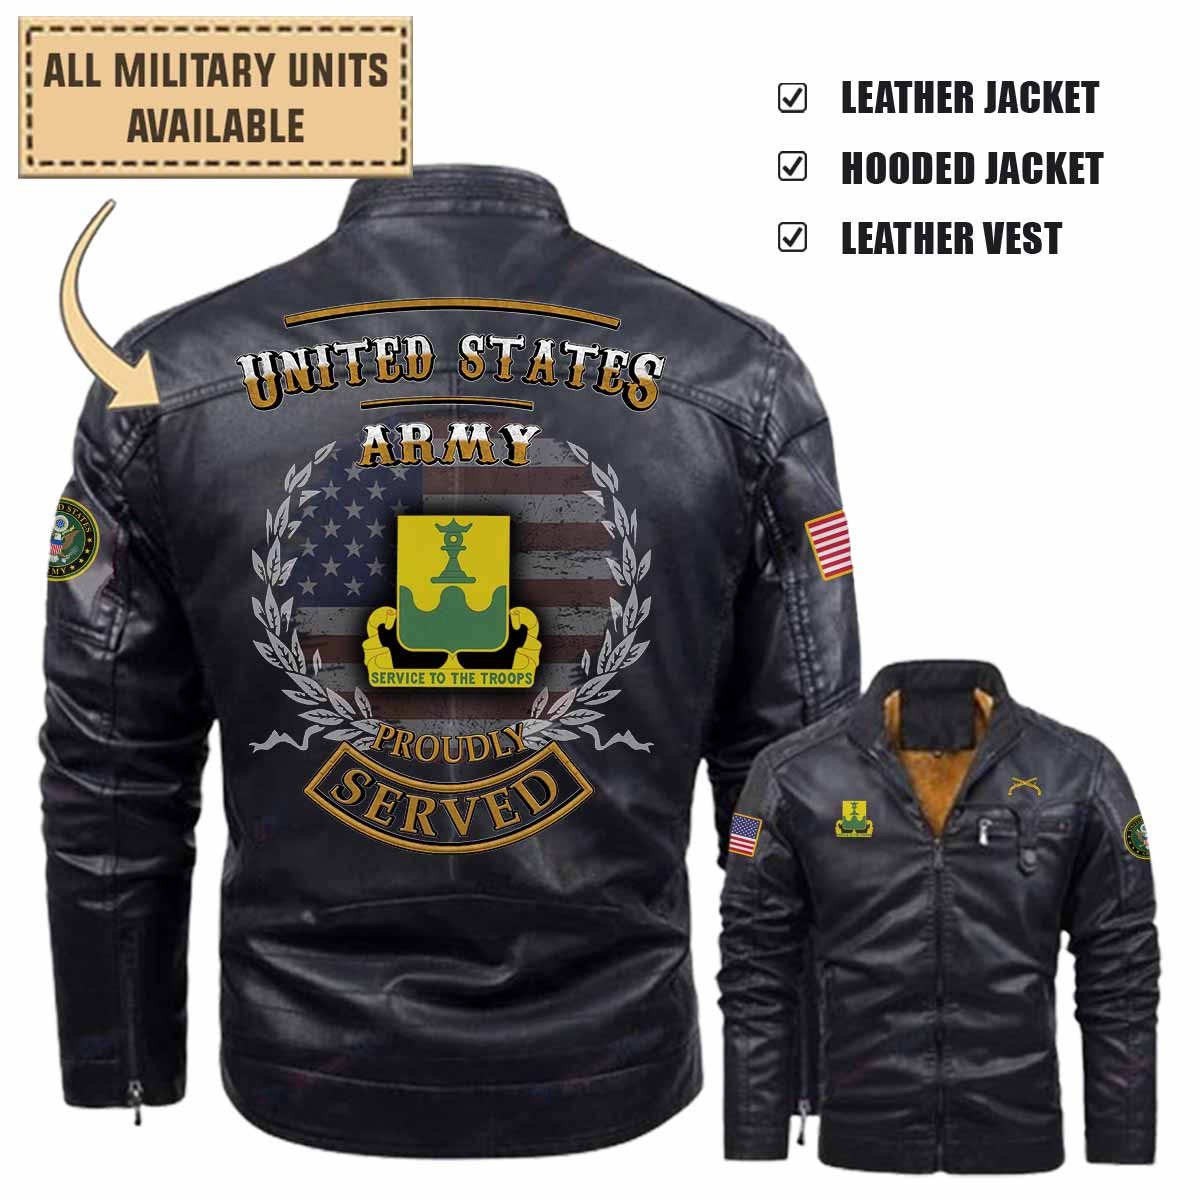 437th MP CO 437th Military Police Company_Military Leather Jacket and Vest